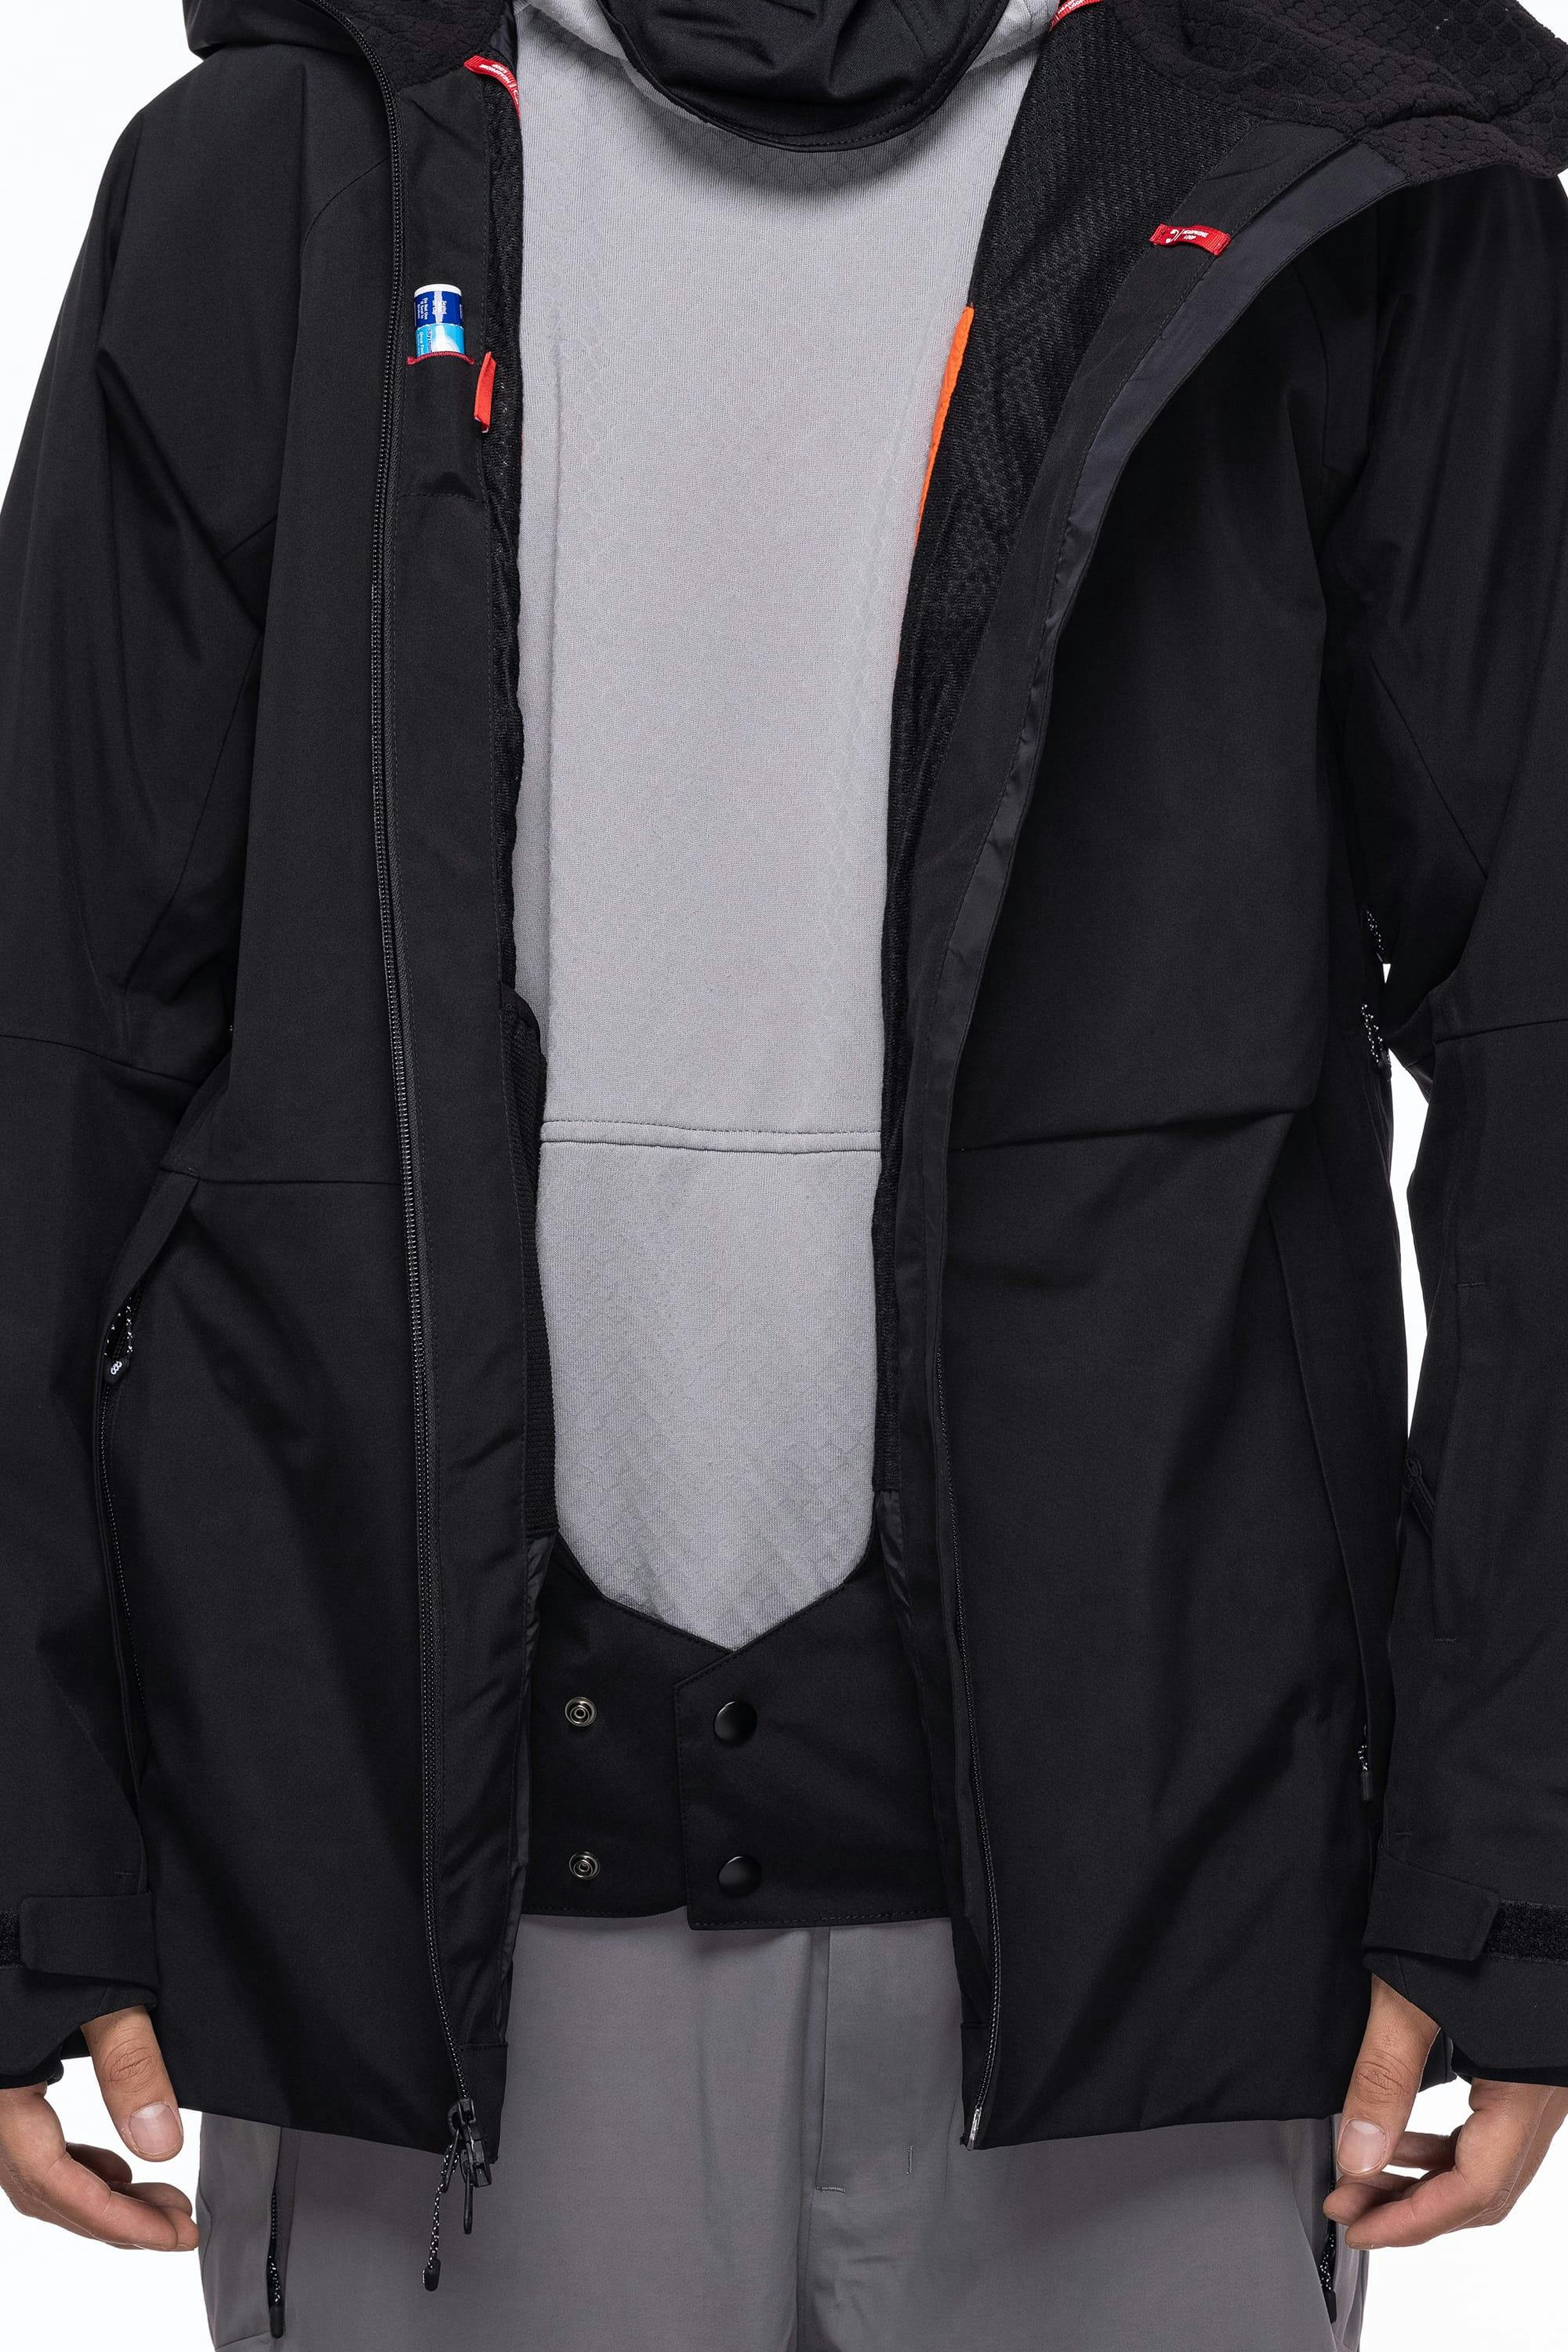 686 Men's Hydra Thermagraph Jacket